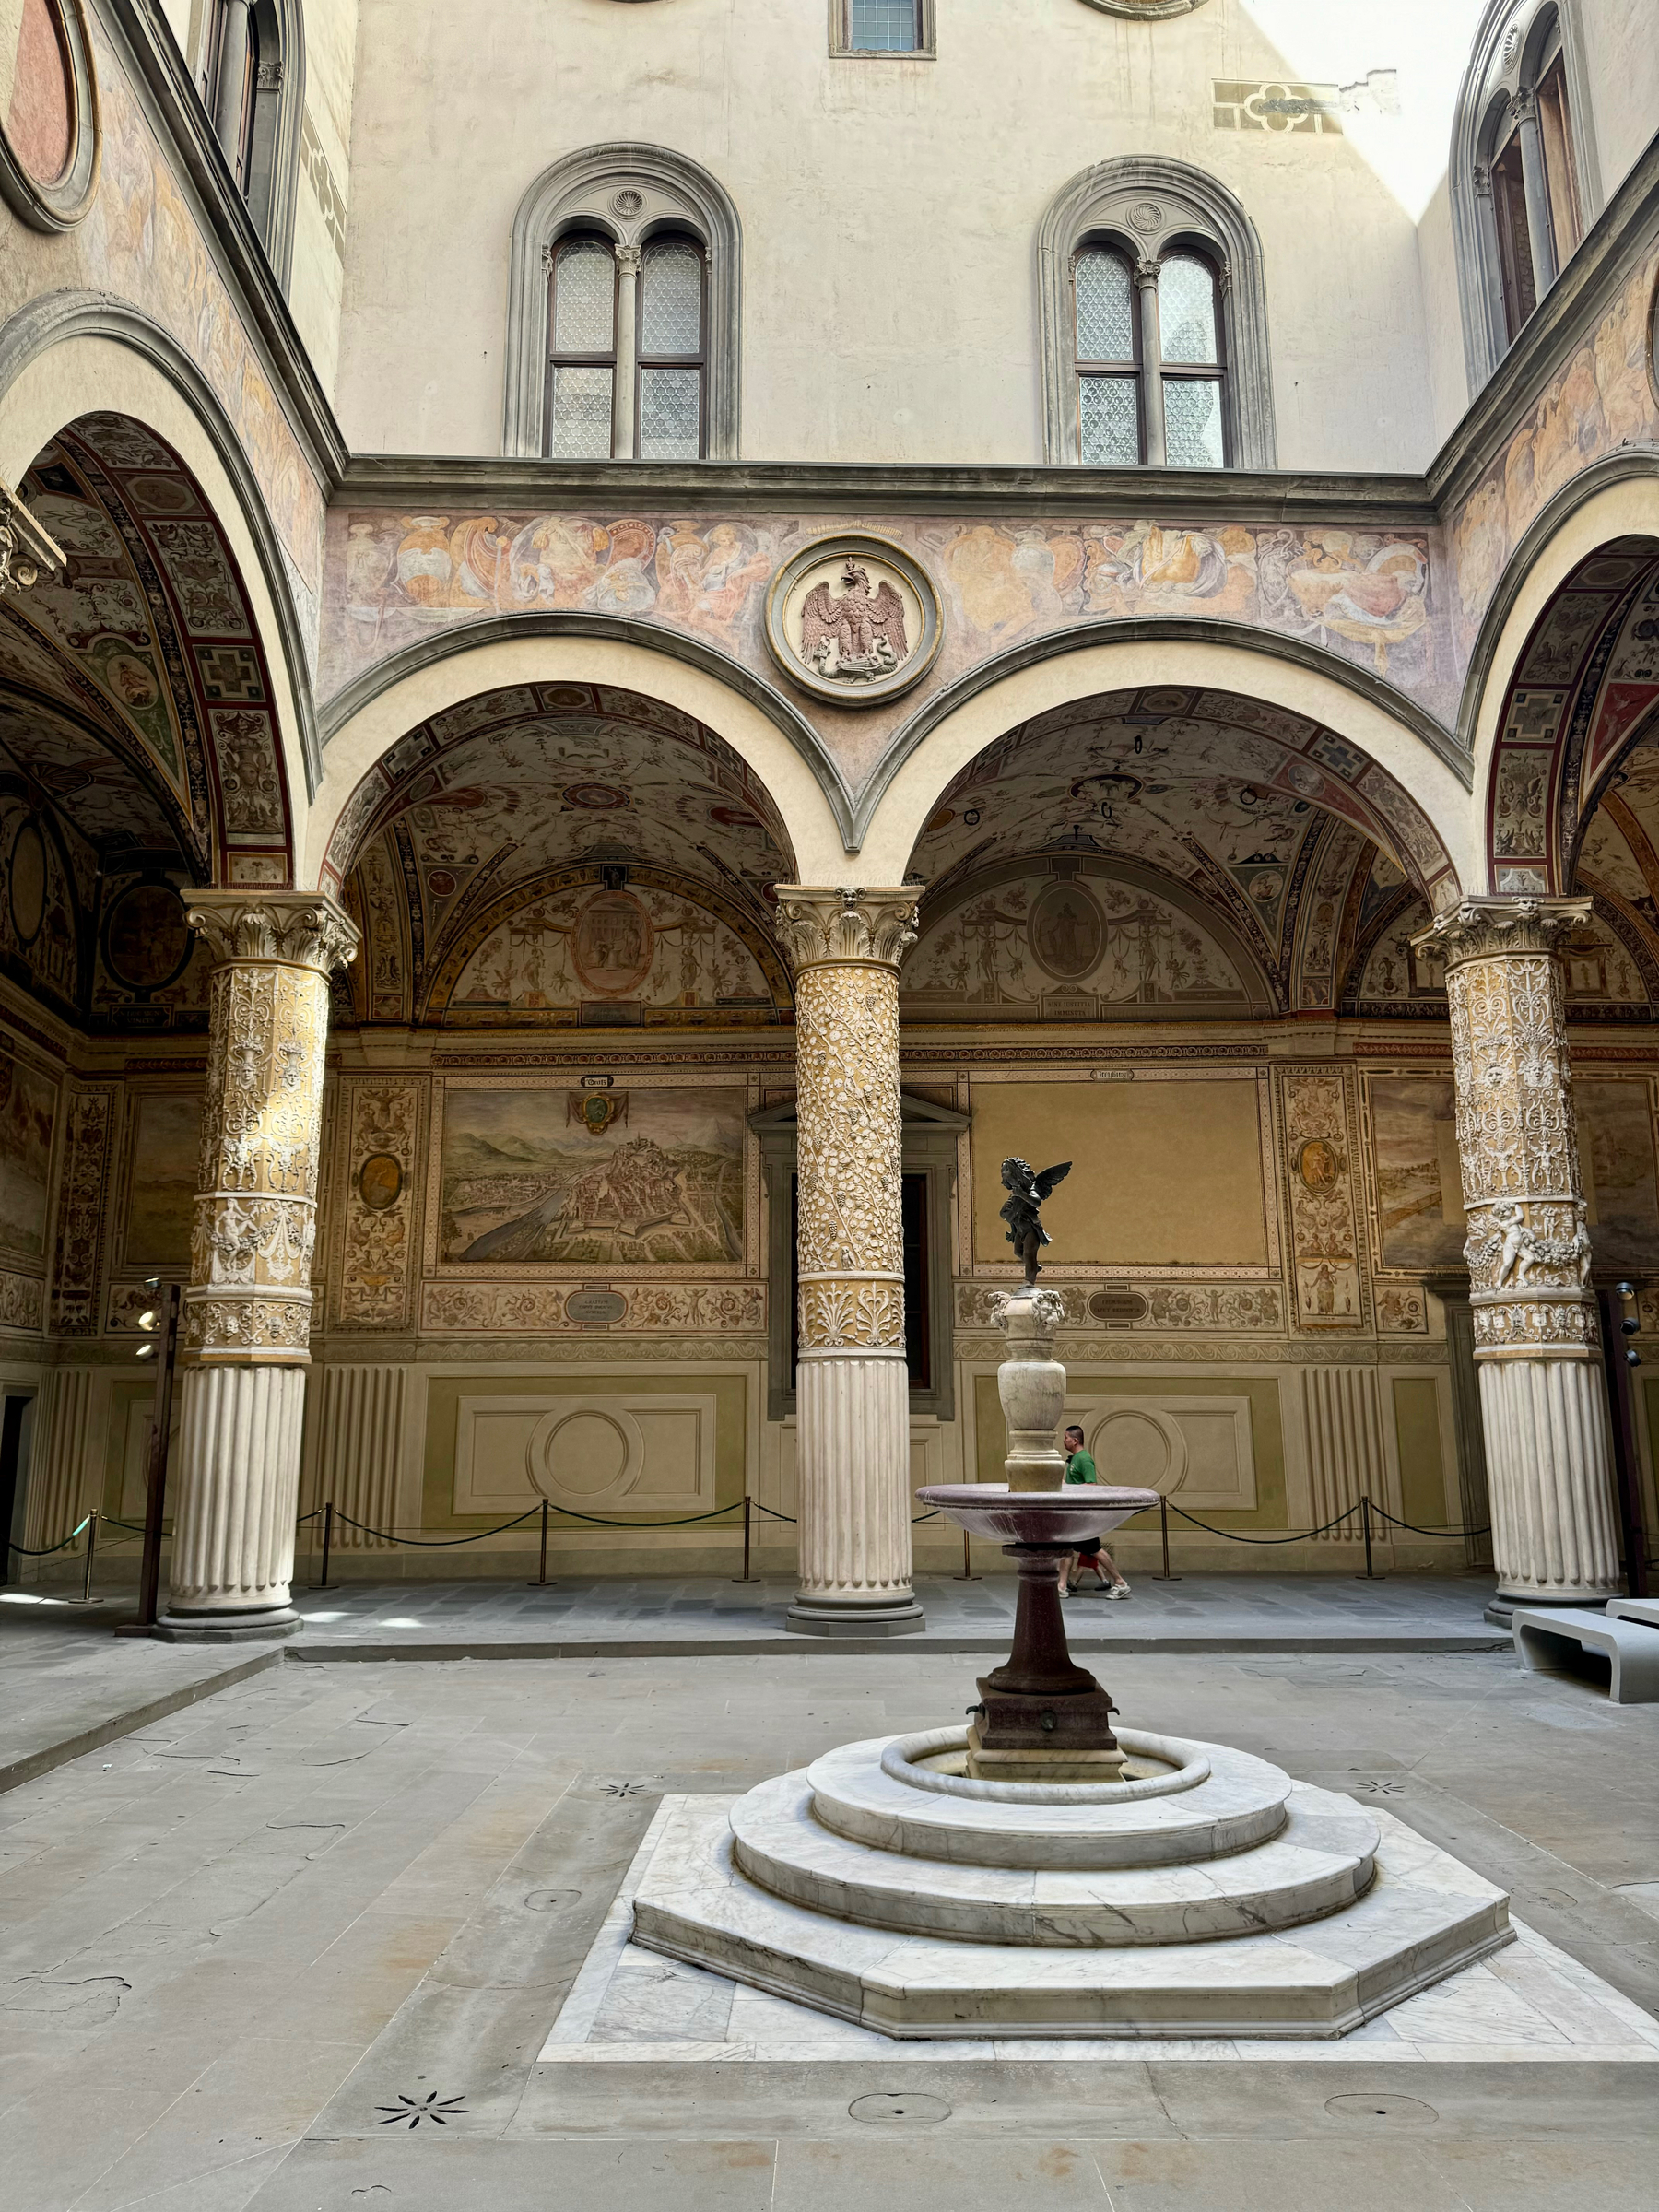 This image shows an interior courtyard featuring ornate columns, arched ceilings with detailed frescoes, and upper windows with stone frames. In the center, there is a fountain with a small statue on top. The courtyard is decorated with historical and artistic elements. 